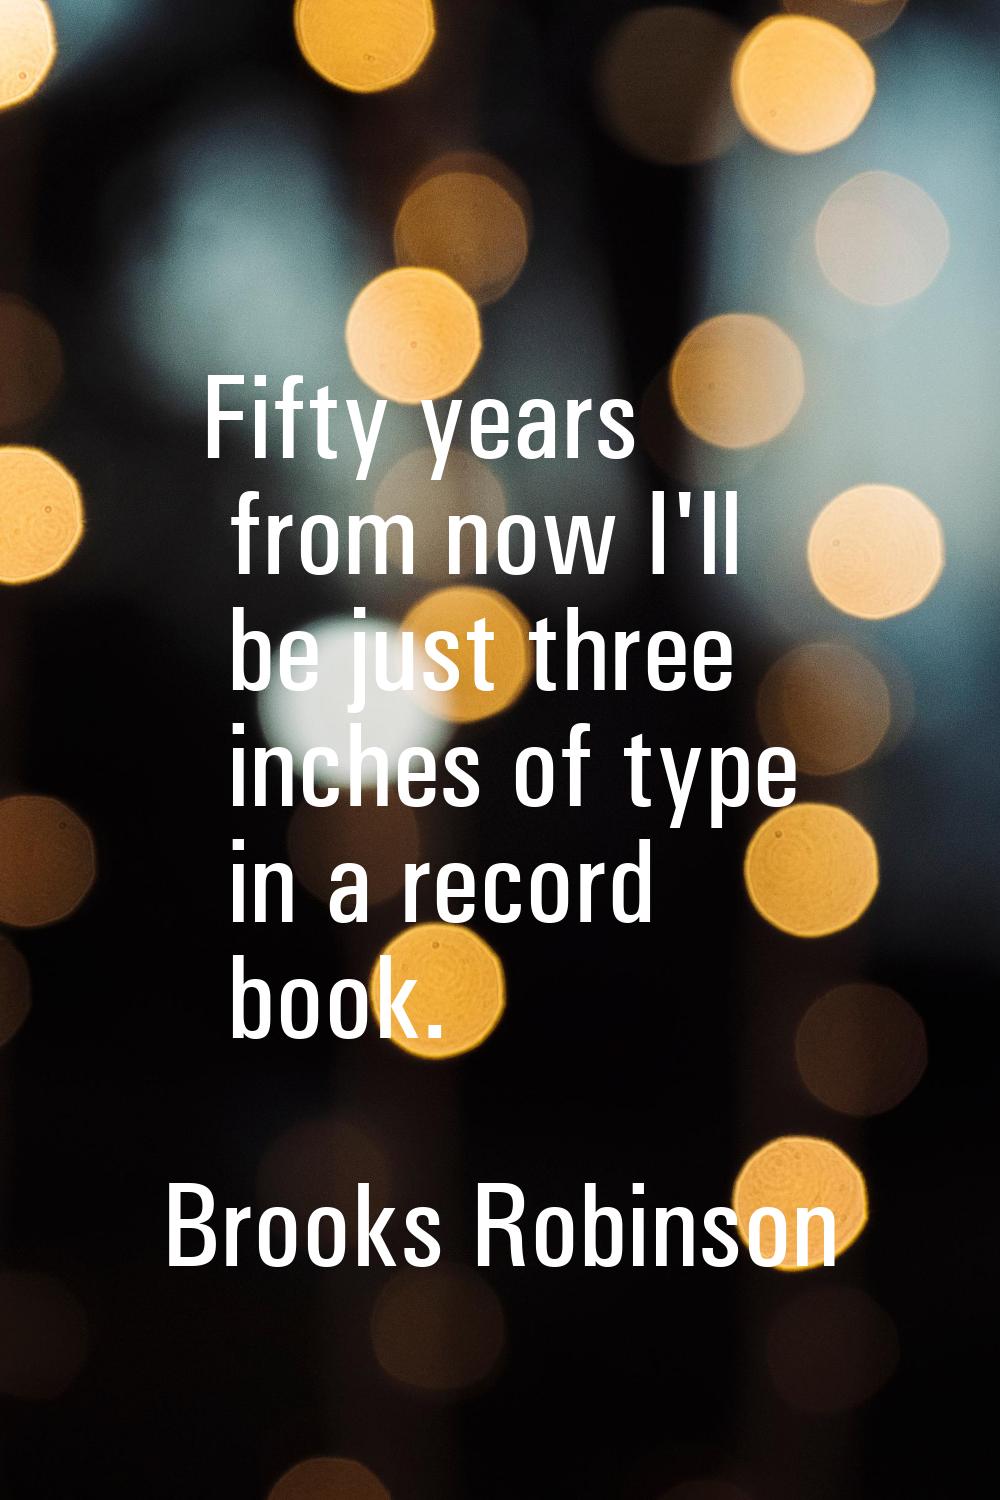 Fifty years from now I'll be just three inches of type in a record book.